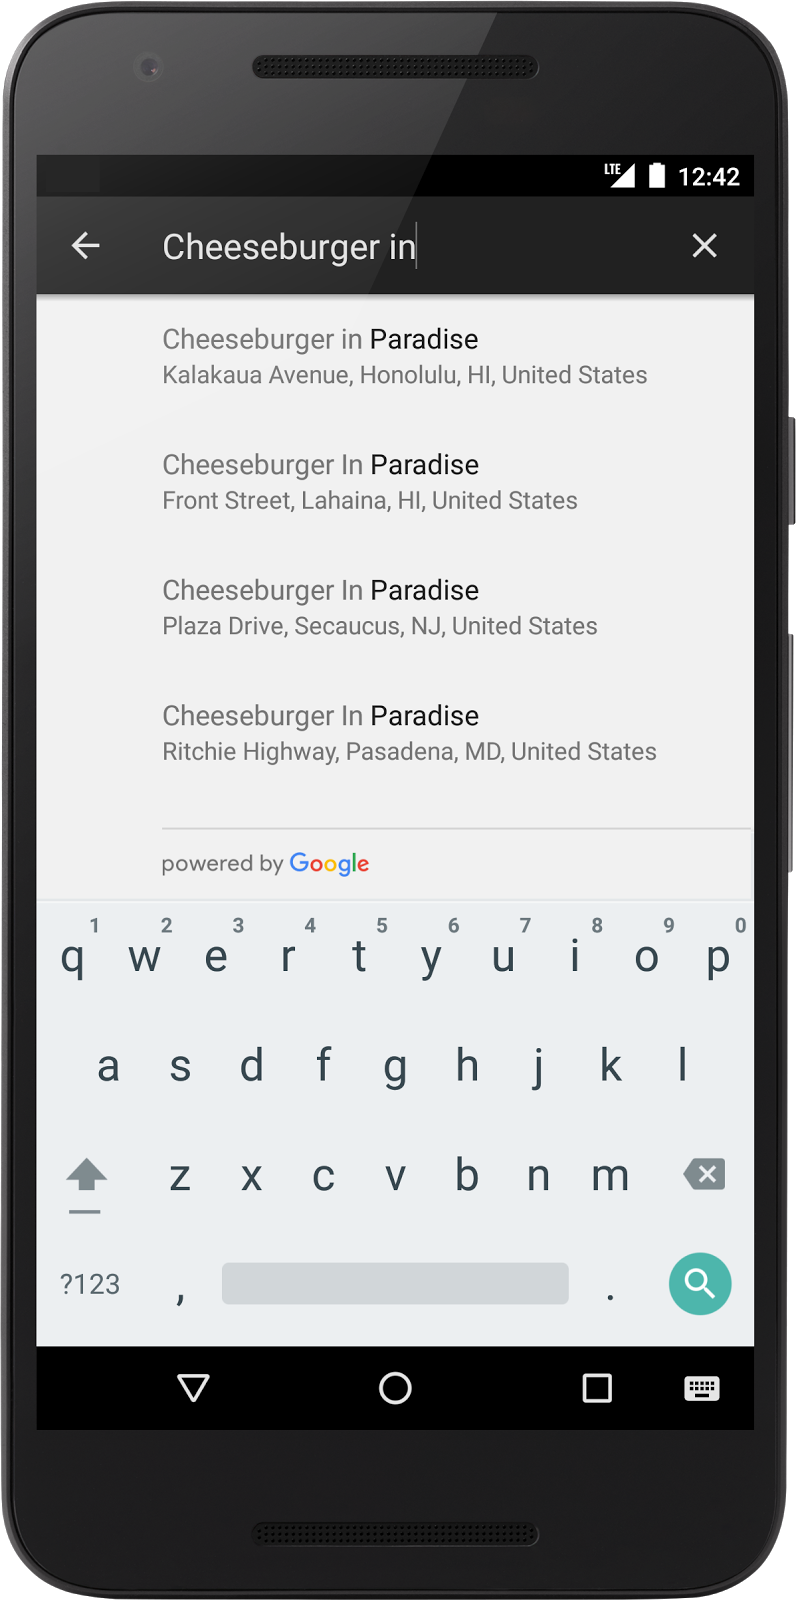  The place-autocomplete search dialog